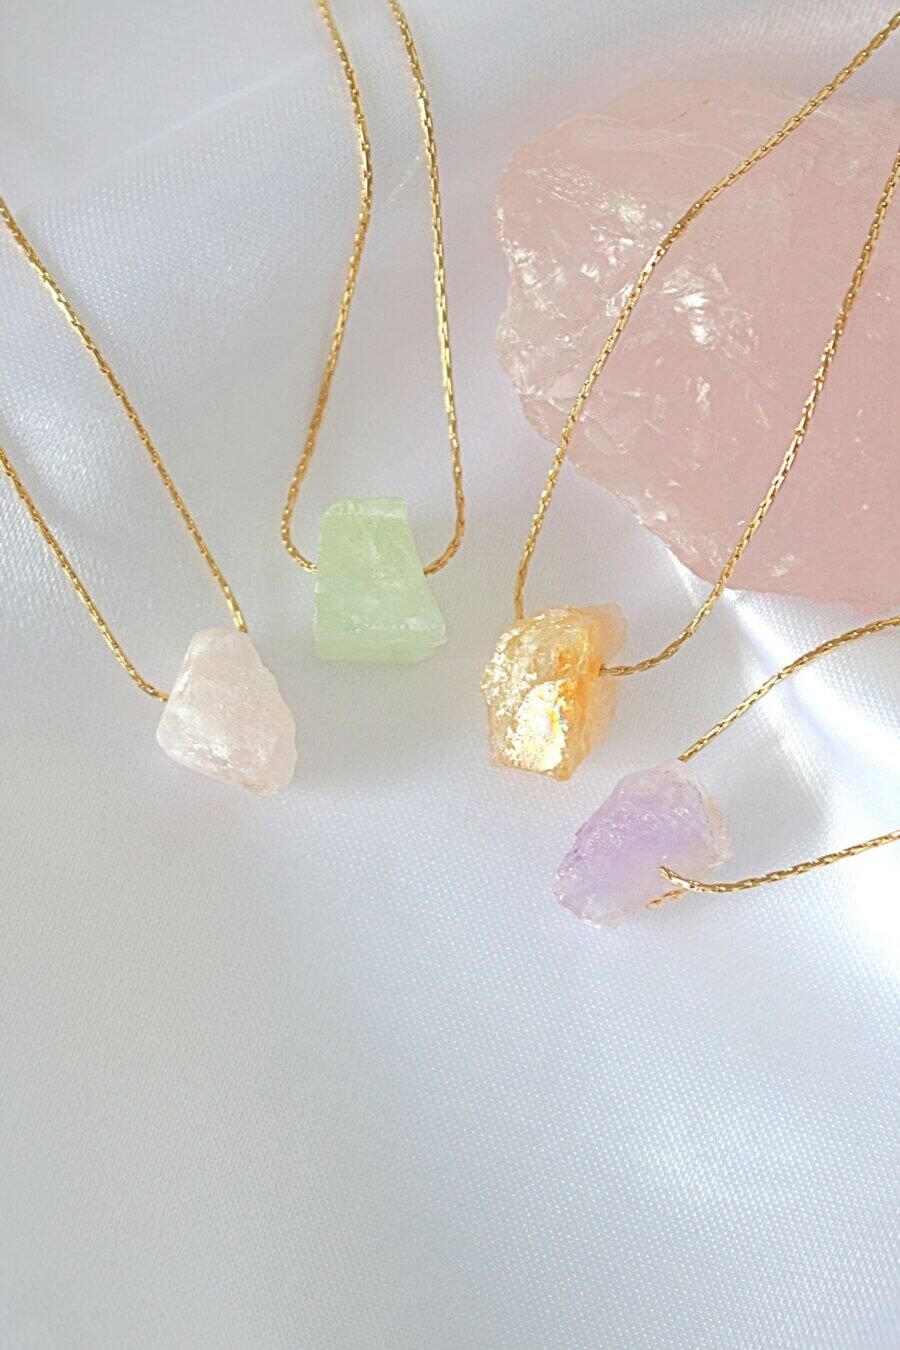 Natural Raw crystal necklace gold Zodiac Leo gemstone necklace, Birthstone  Necklace August Birthday Gift, Healing crystal jewelry